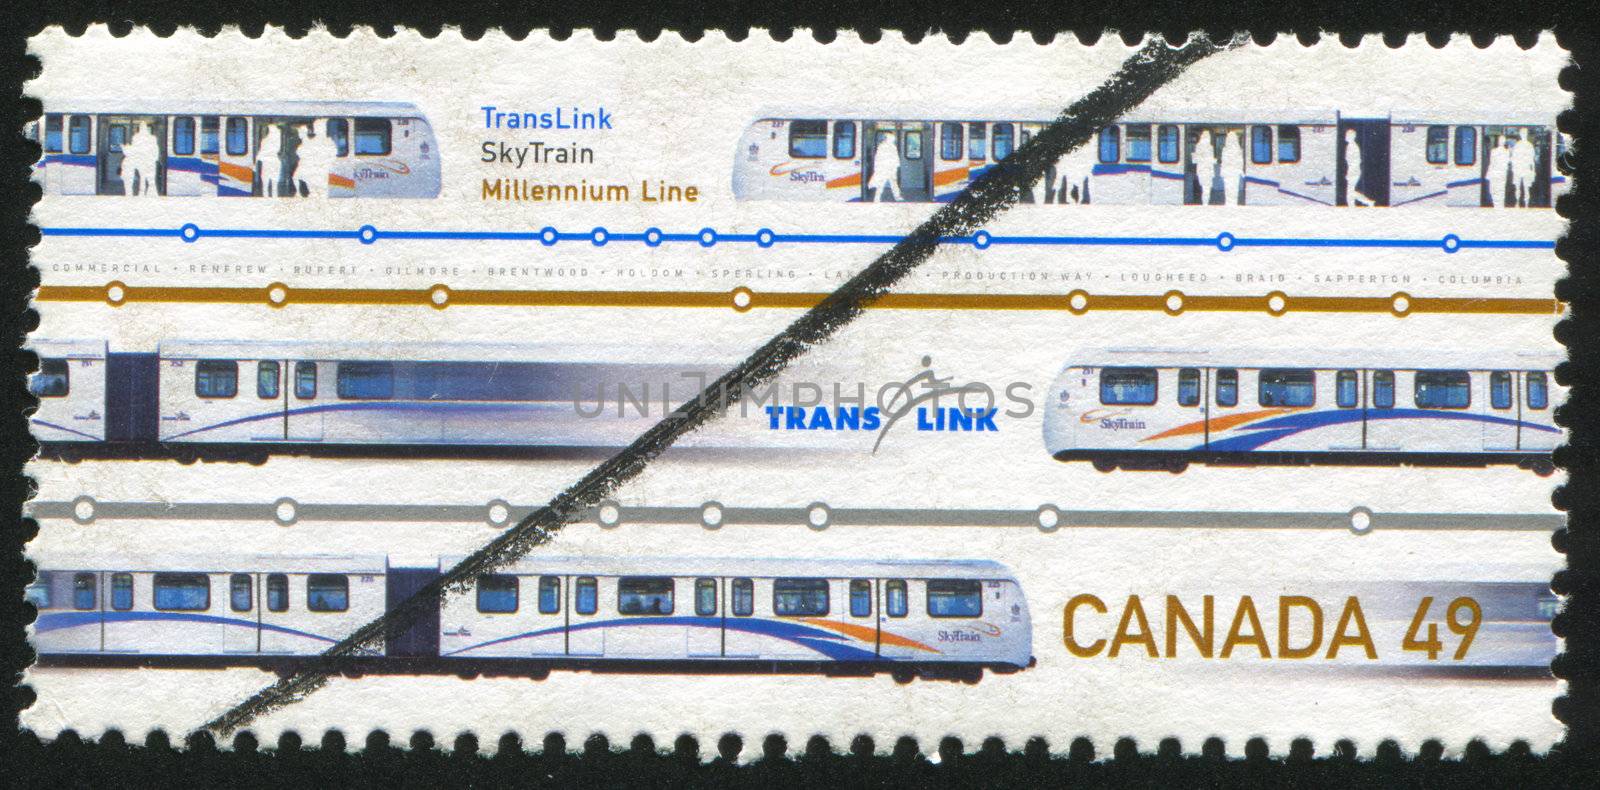 CANADA - CIRCA 2004: stamp printed by Canada, shows Urban Transit and Light Rail Systems, TransLink SkyTrain, Vancouver, circa 2004